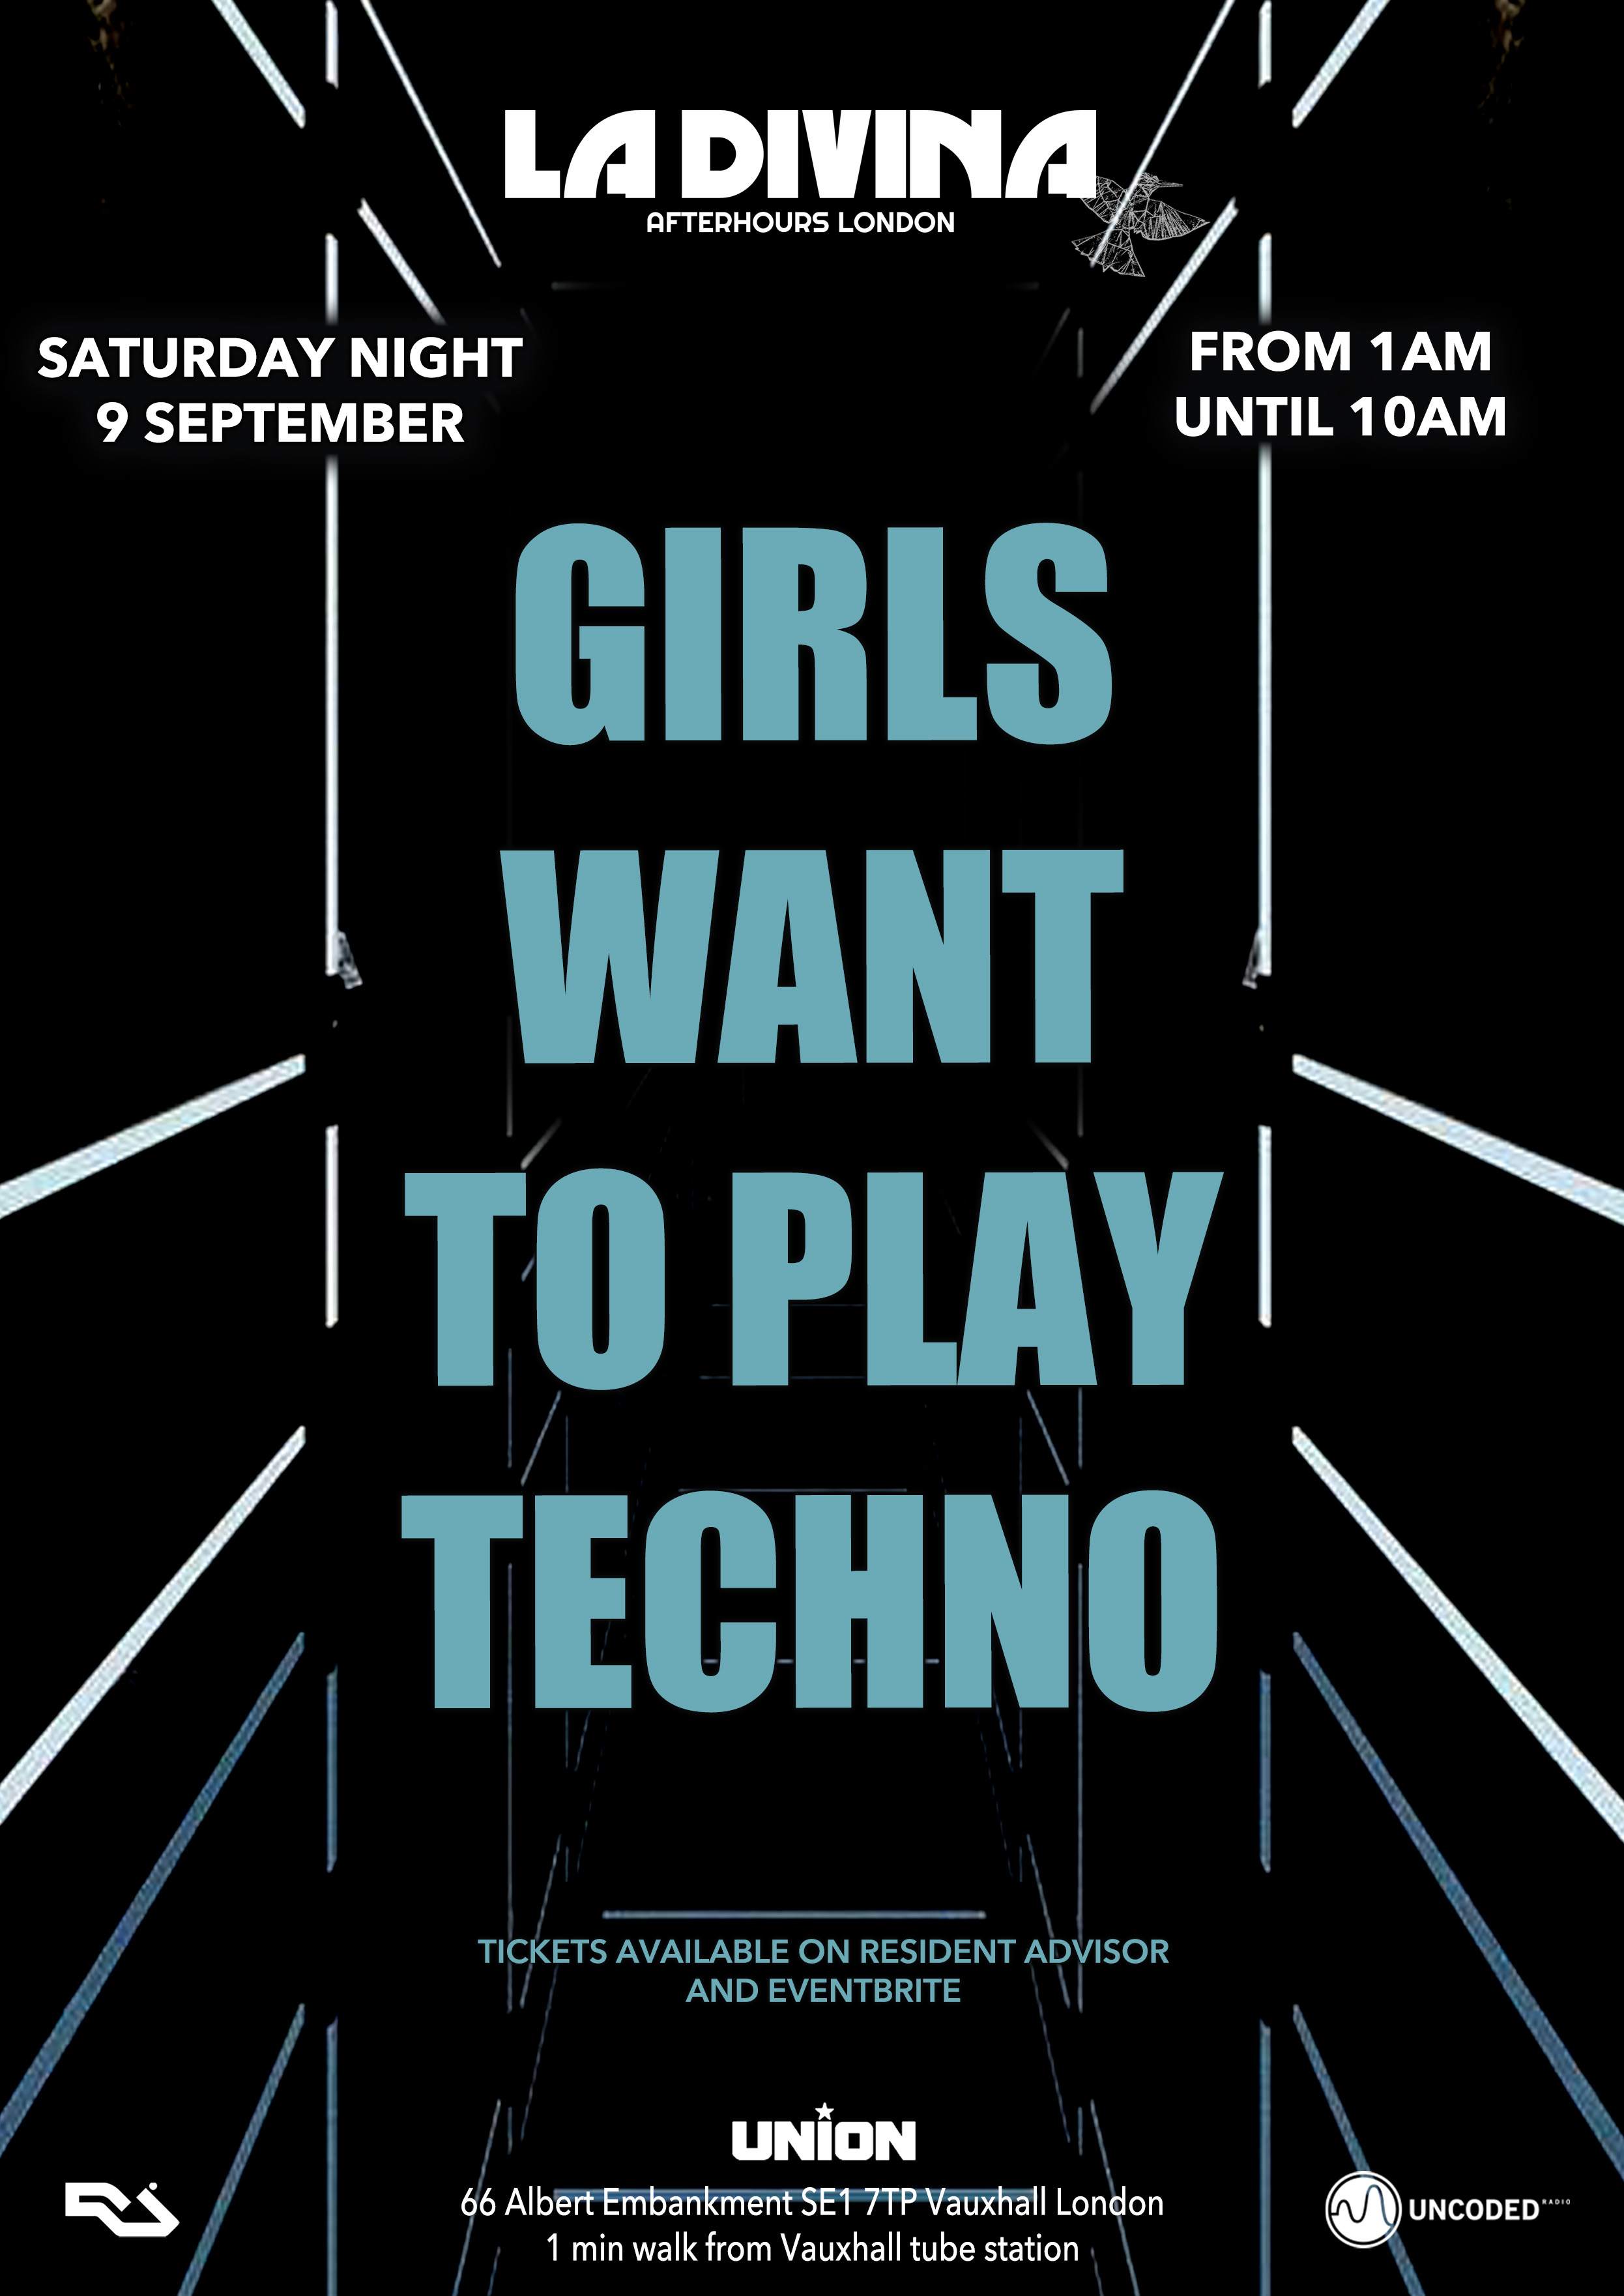 La Divina Afterhours ' Girls want to play techno ' - フライヤー裏